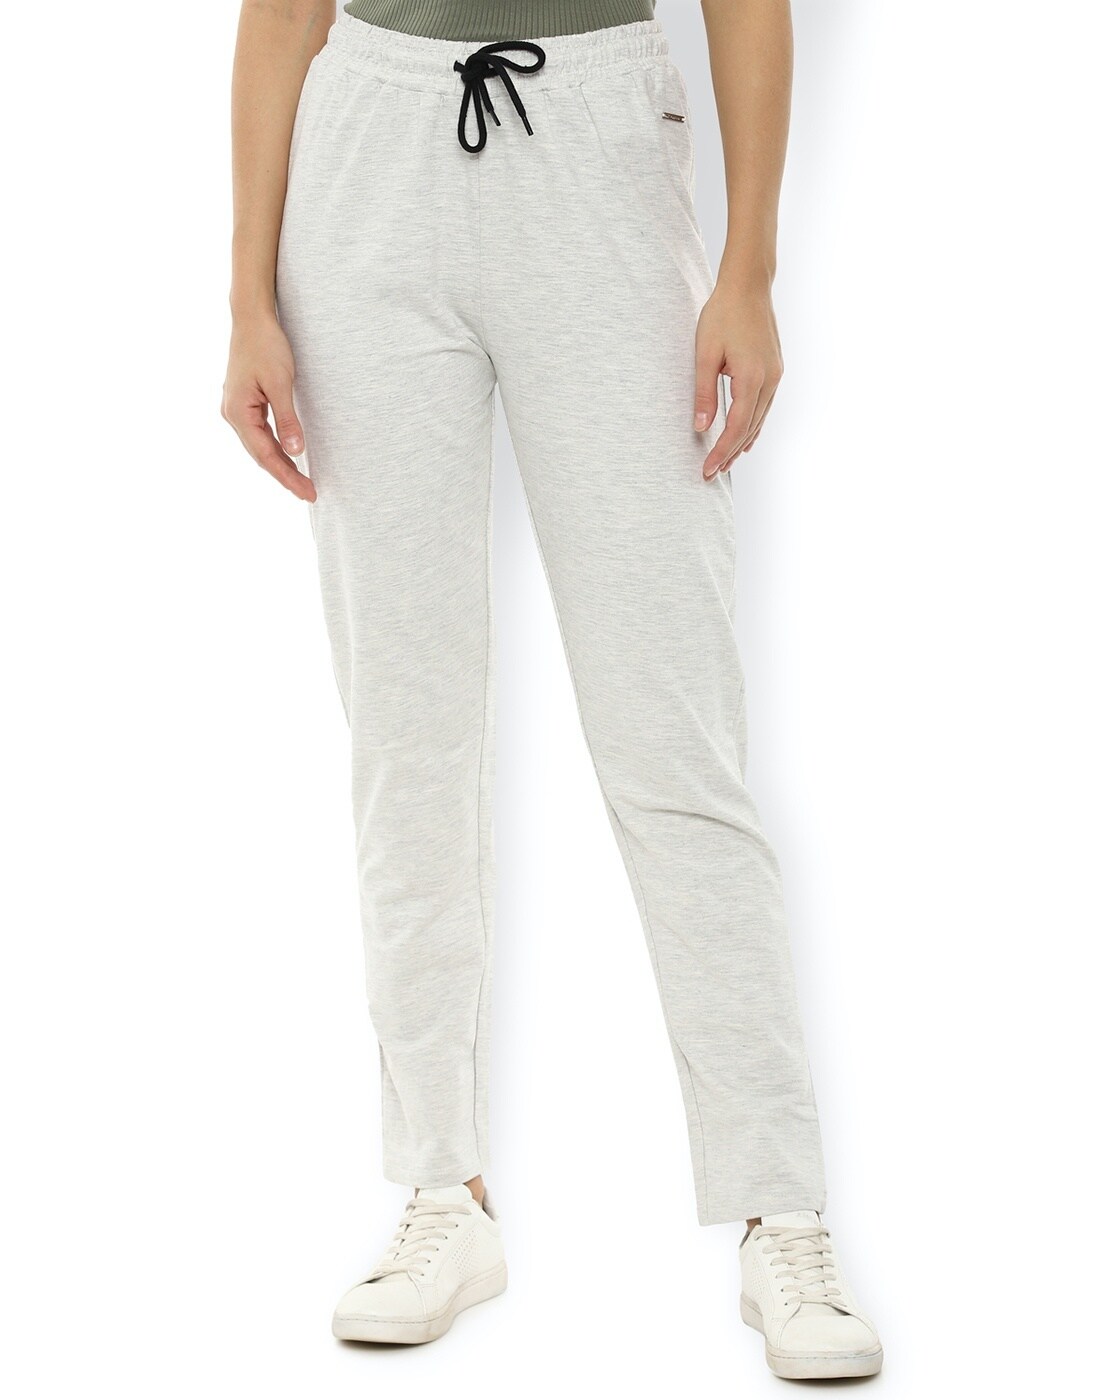 Buy Rose Gold Track Pants for Women by Outryt Sport Online | Ajio.com